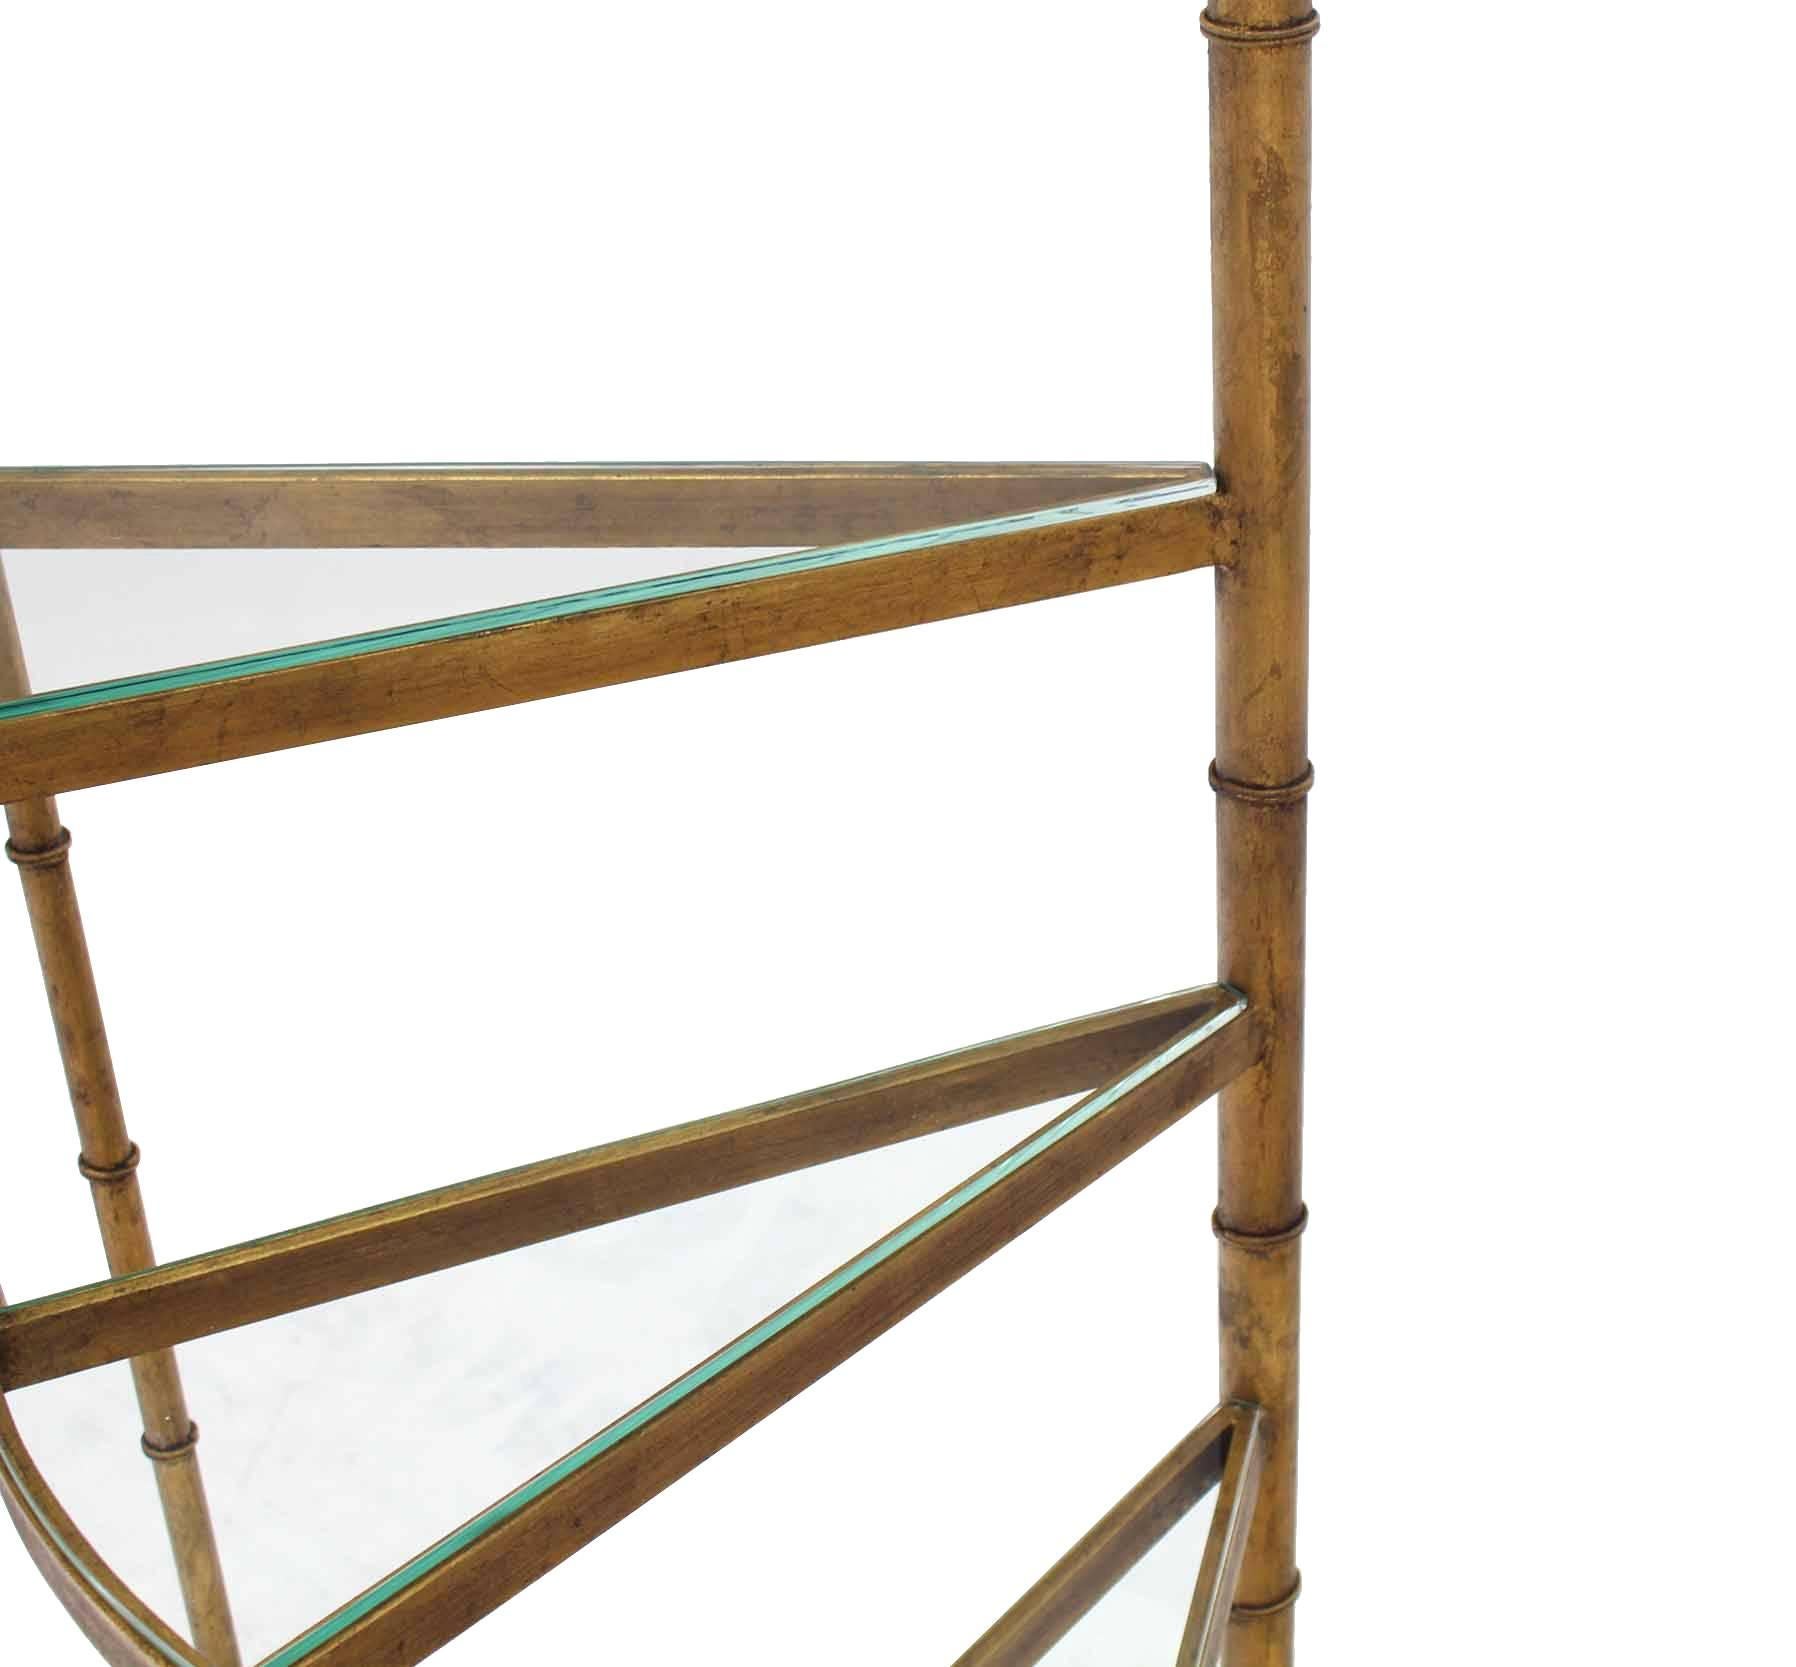 Step Shelves Faux Bamboo Gilt Base Floor Lamp In Excellent Condition For Sale In Rockaway, NJ